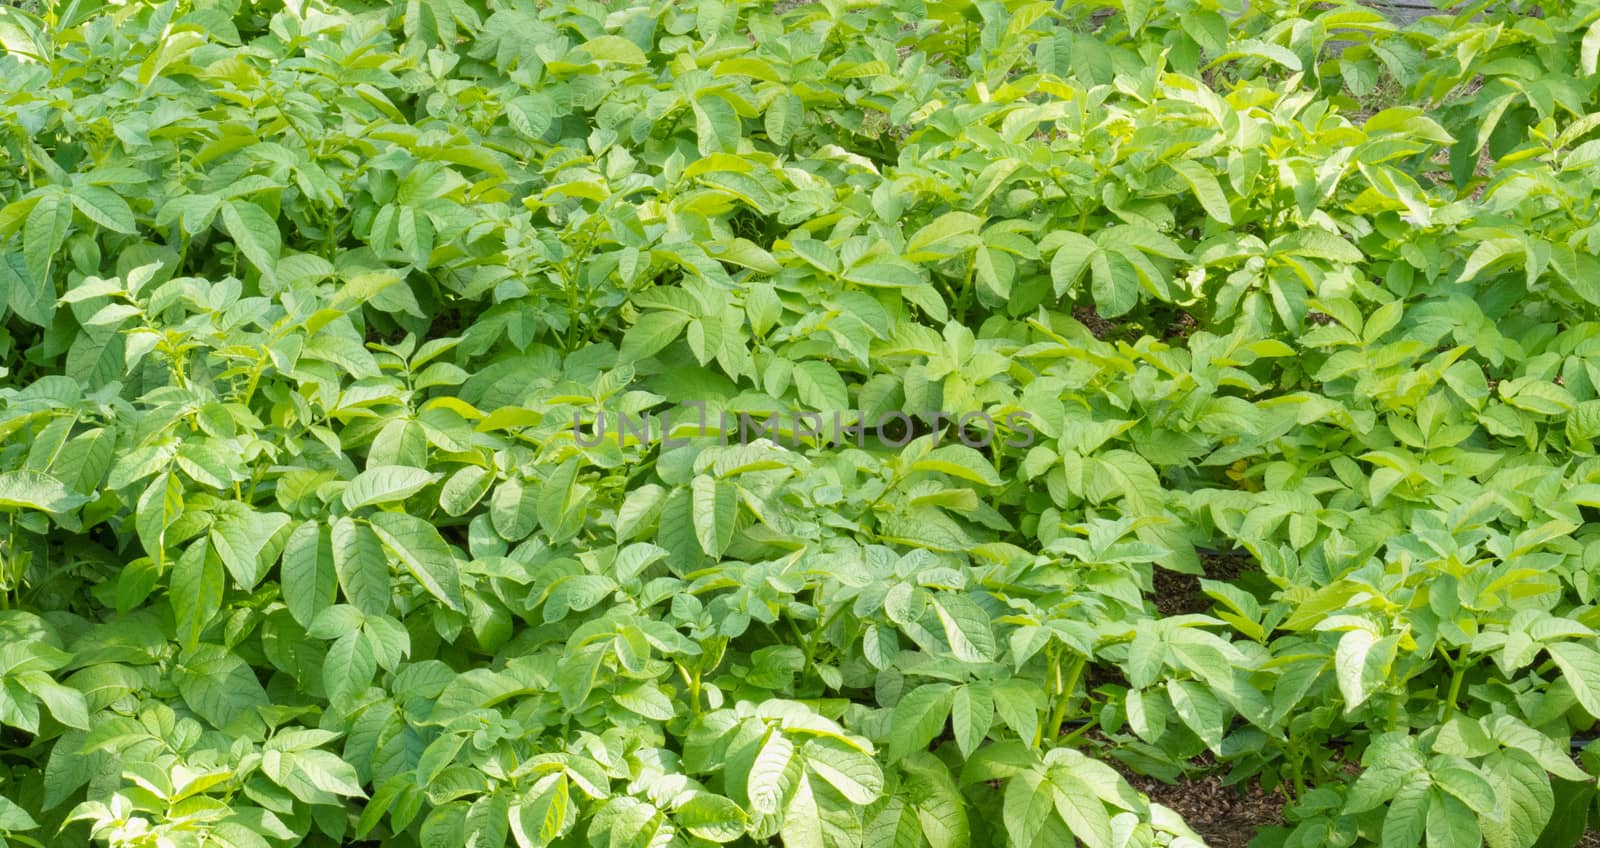 Cultivated potato plants agriculture background by PiLens